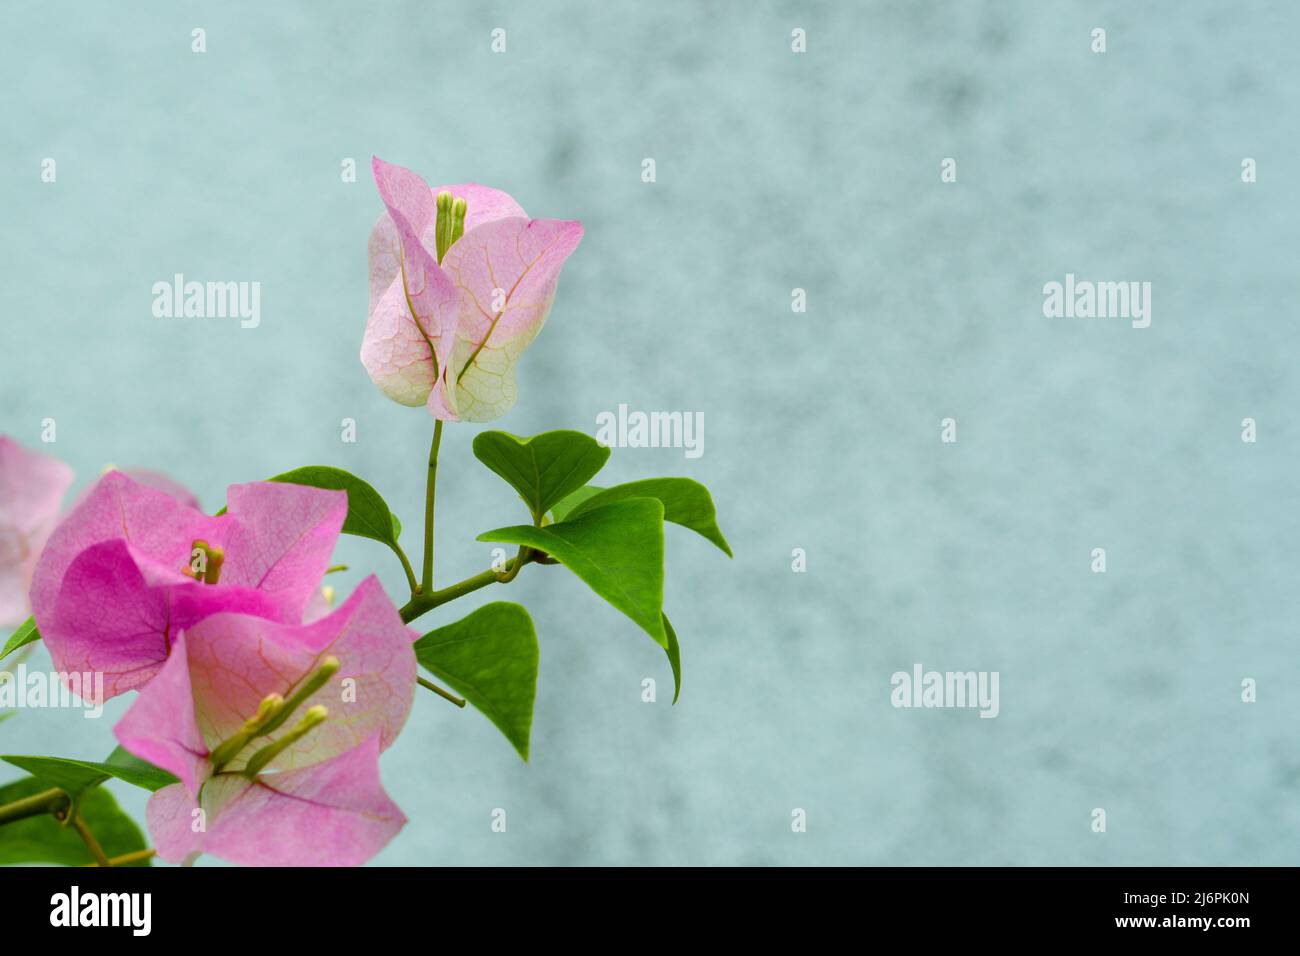 Beautiful pink flower of blooming tree on a branch close up. Has flowers in the background. Spring and nature concept Stock Photo